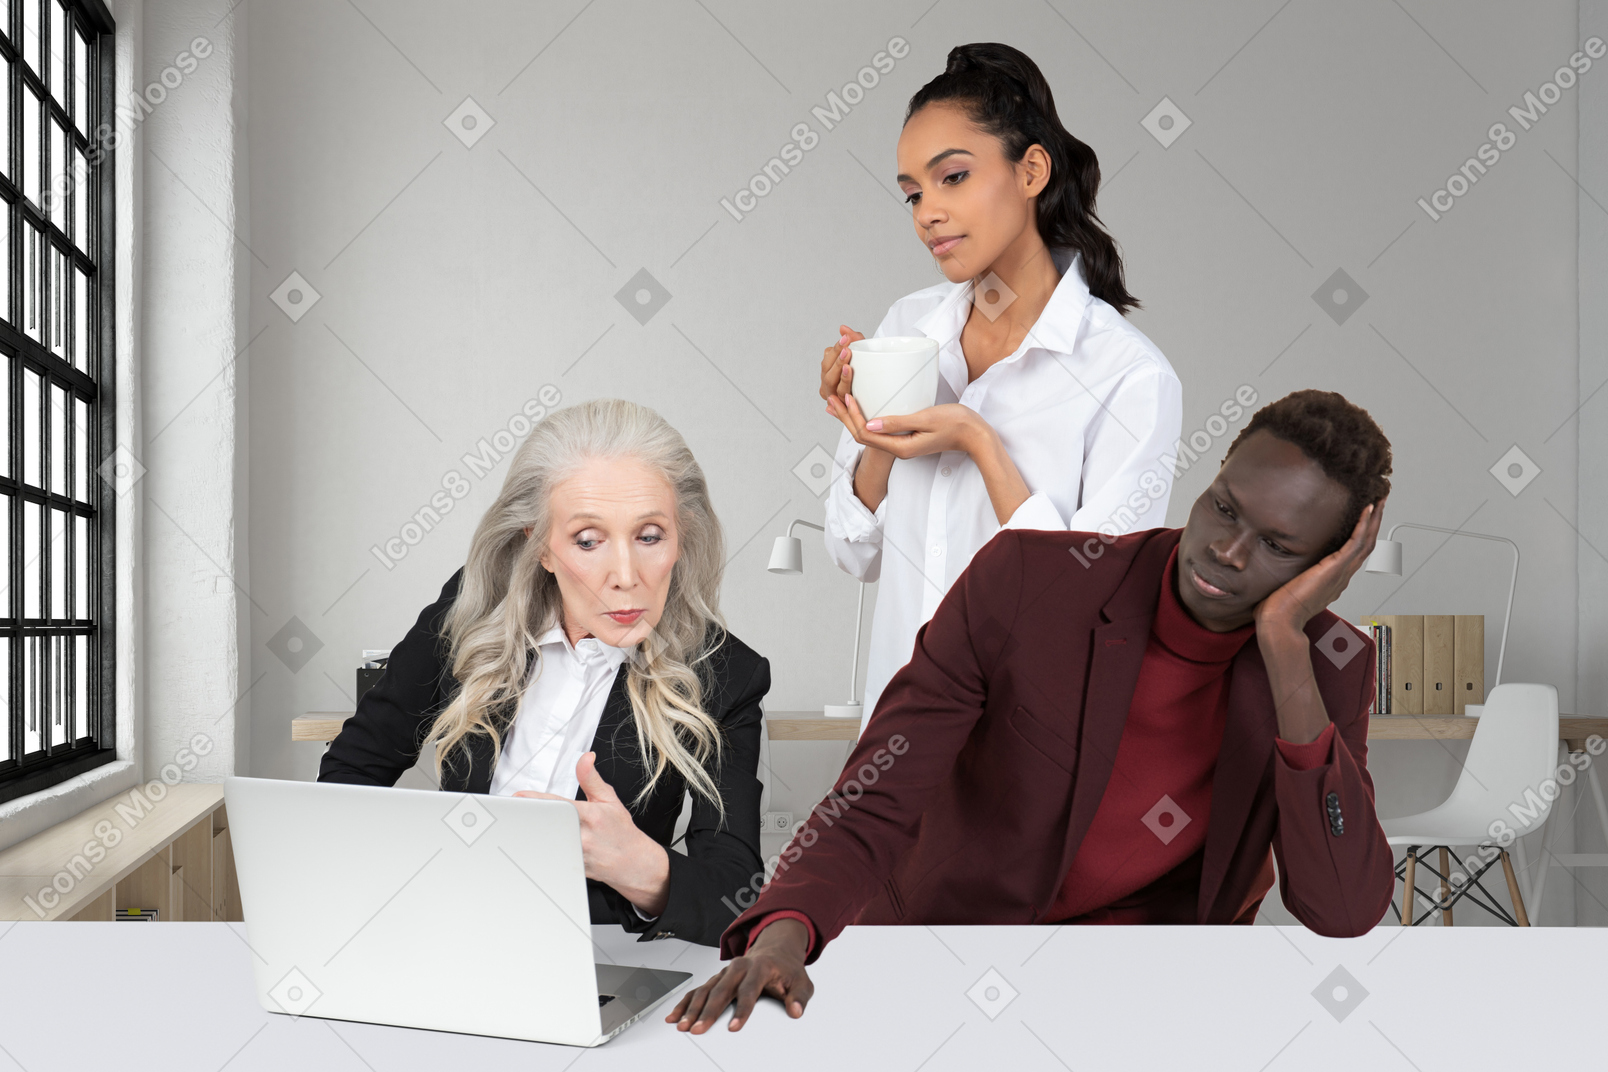 A group of people sitting at a table with laptop